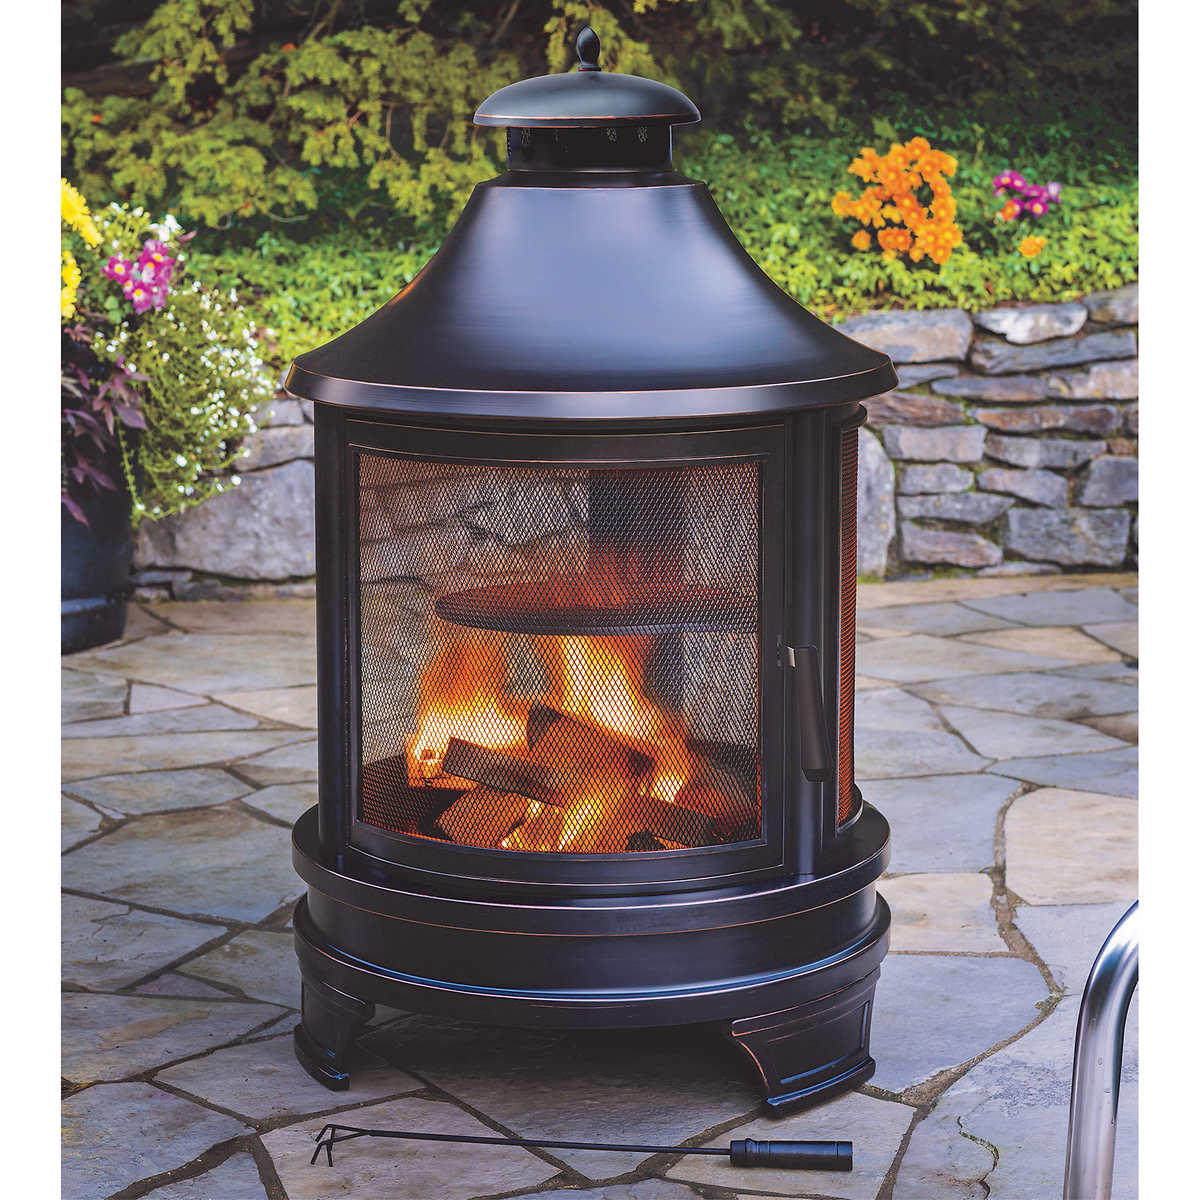 Outdoor Wood Burning Round Cooking Pit, Propane Fire Pit Costco